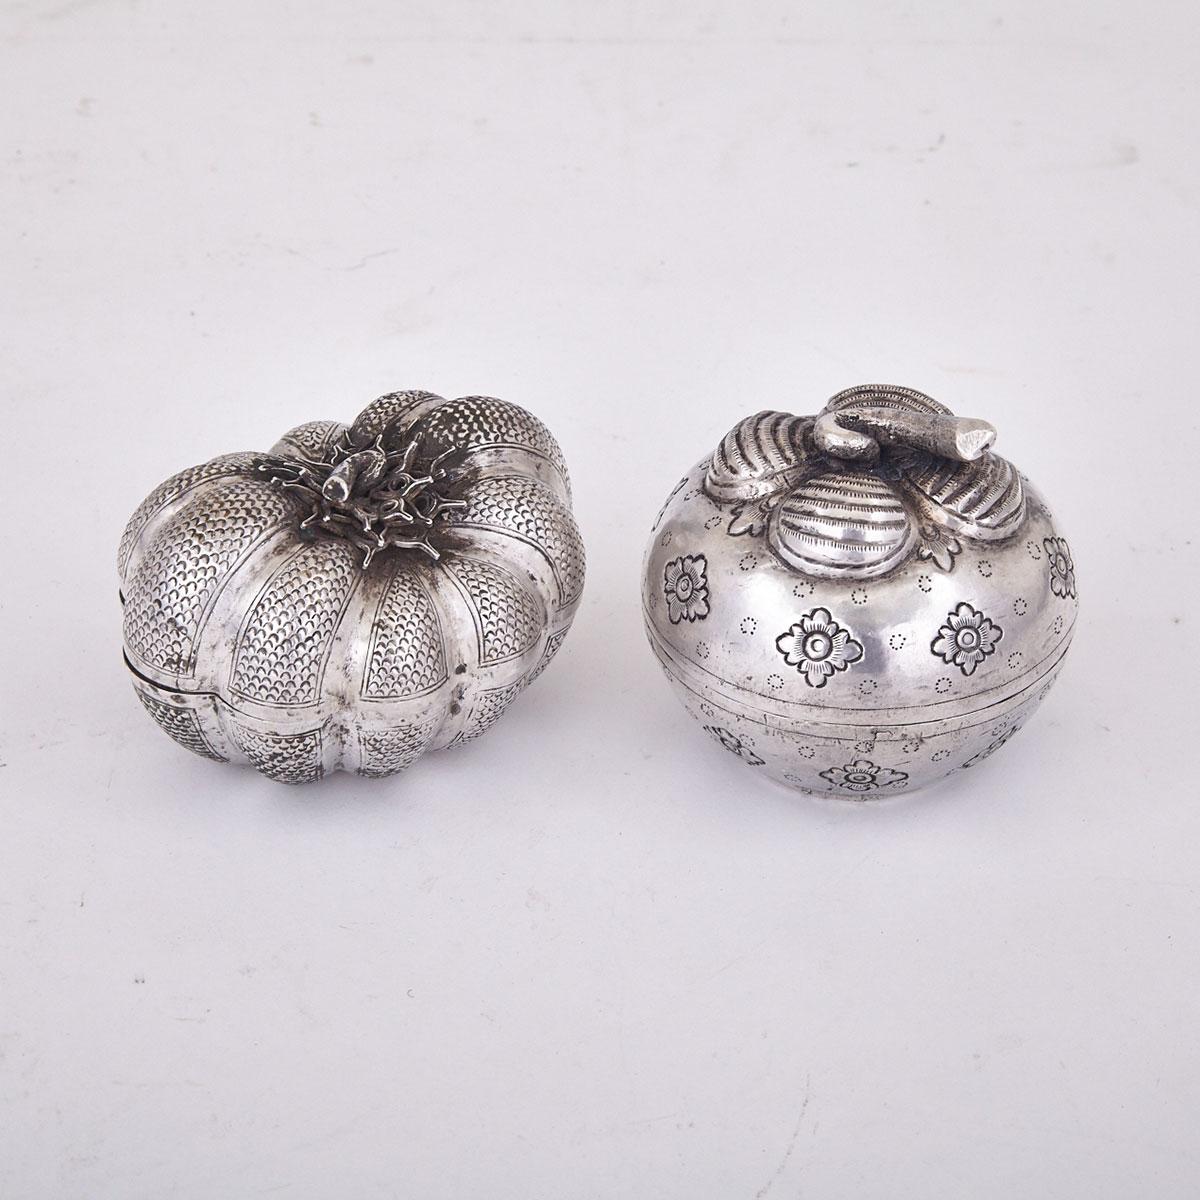 Two Burmese Silver Gourd-Form Boxes, 20th Century